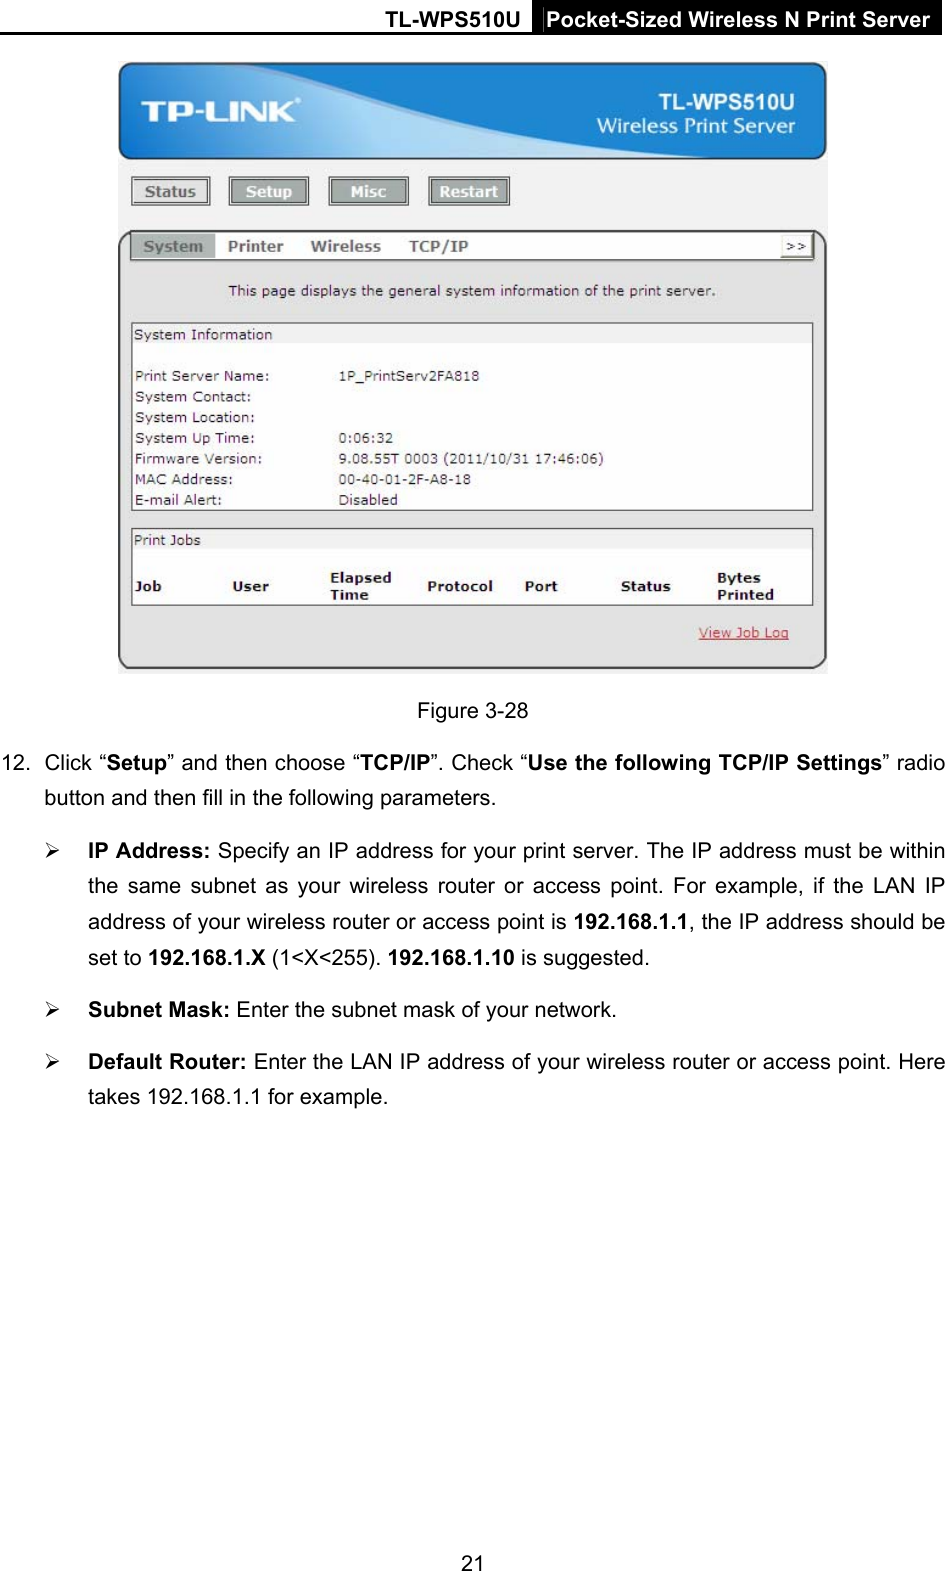 TL-WPS510U Pocket-Sized Wireless N Print Server  Figure 3-28 12. Click “Setup” and then choose “TCP/IP”. Check “Use the following TCP/IP Settings” radio button and then fill in the following parameters.  IP Address: Specify an IP address for your print server. The IP address must be within the same subnet as your wireless router or access point. For example, if the LAN IP address of your wireless router or access point is 192.168.1.1, the IP address should be set to 192.168.1.X (1&lt;X&lt;255). 192.168.1.10 is suggested.  Subnet Mask: Enter the subnet mask of your network.  Default Router: Enter the LAN IP address of your wireless router or access point. Here takes 192.168.1.1 for example. 21 